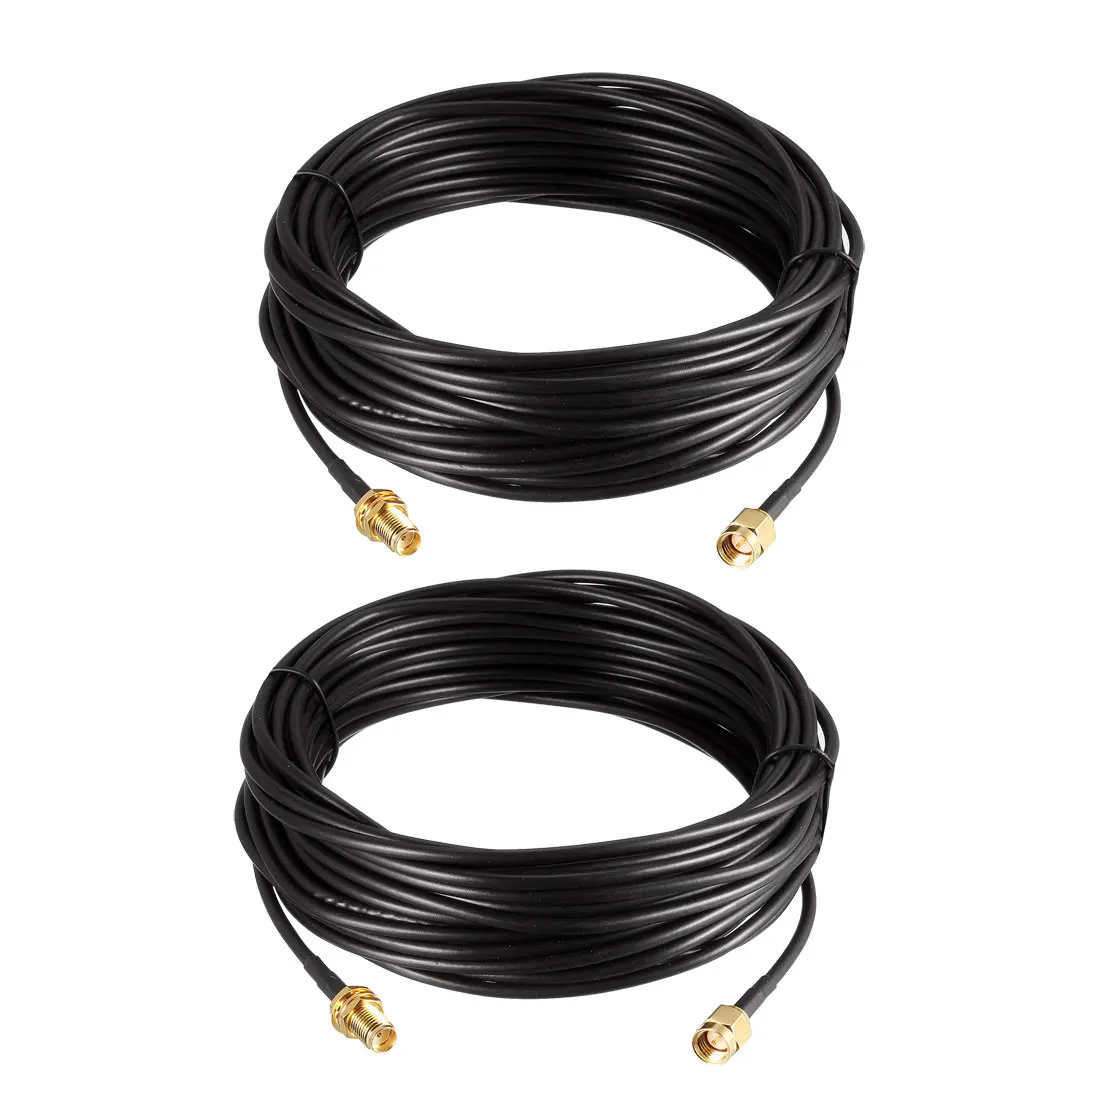 

2pcs 33ft RG174 SMA Extension Cable SMA Male to SMA Female Antenna Coax Cable for Coax Coaxial WiFi Network Card Router Antenna